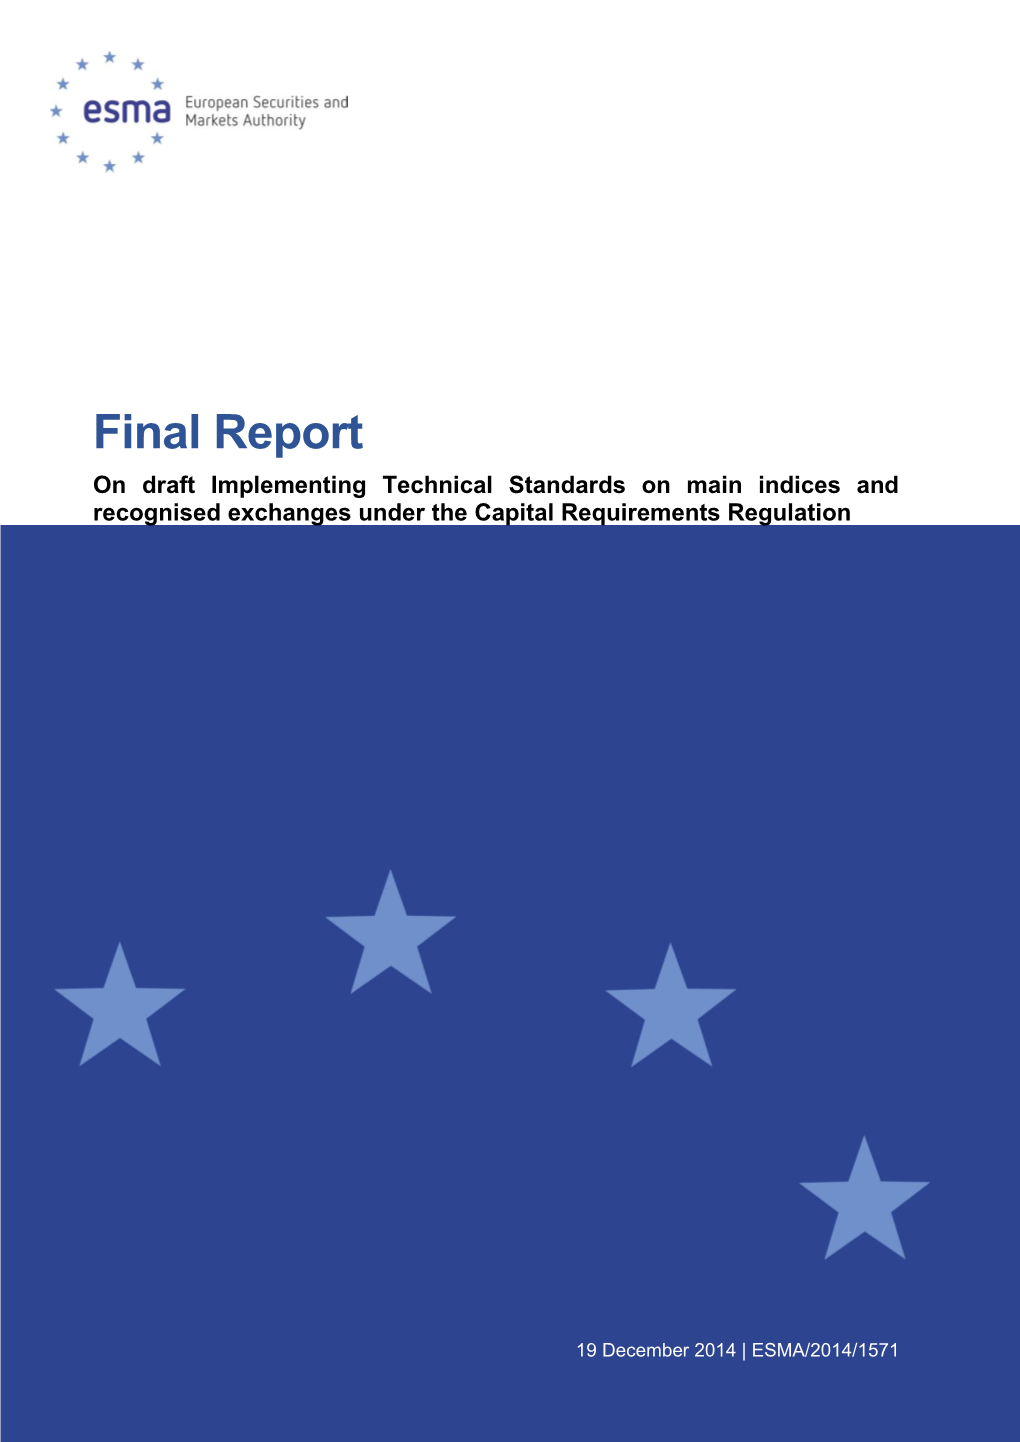 Final Report on Draft Implementing Technical Standards on Main Indices and Recognised Exchanges Under the Capital Requirements Regulation